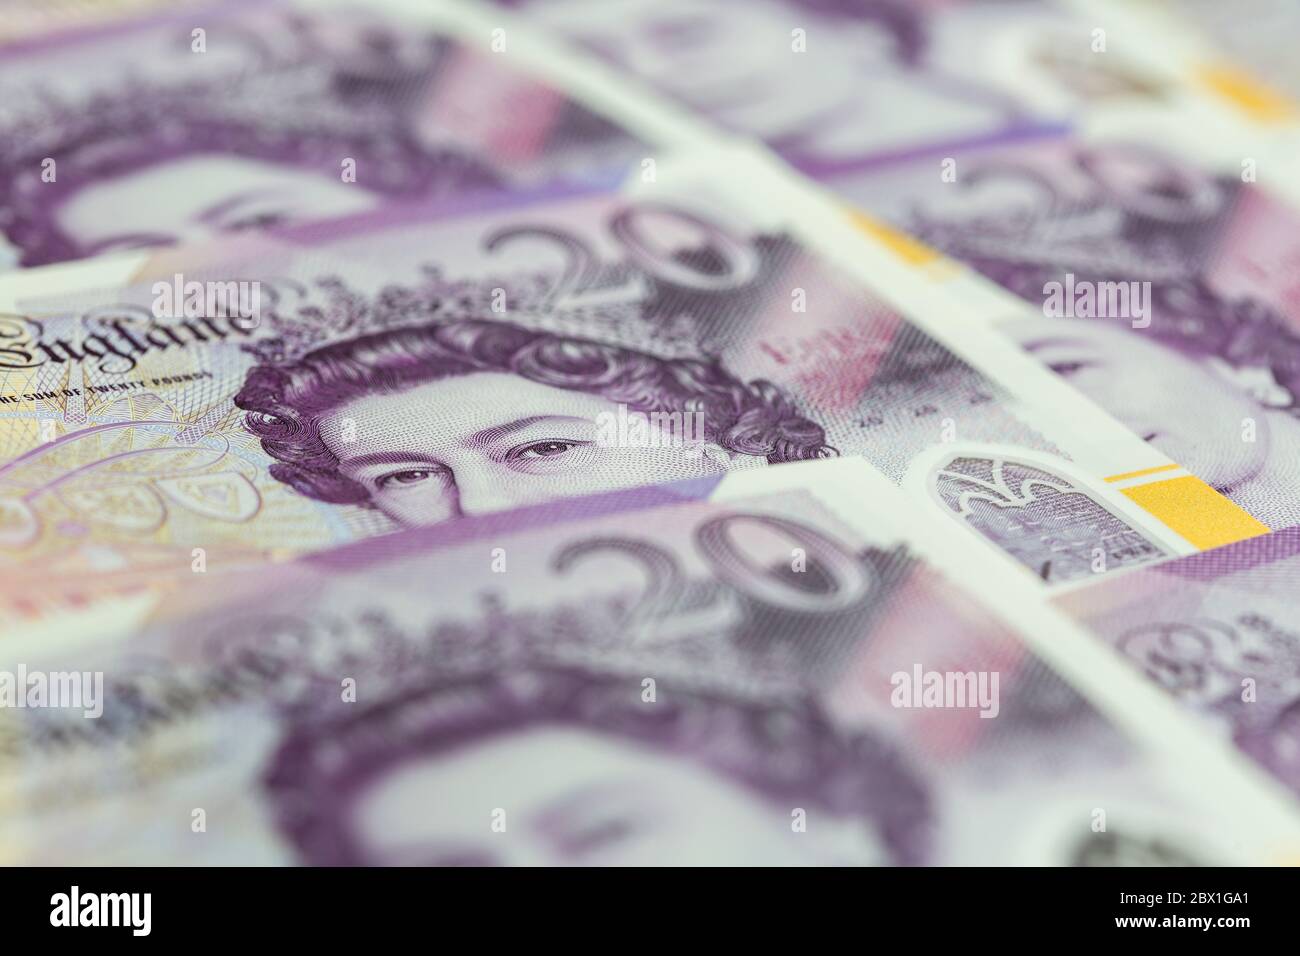 close up images of 20 pound notes UK currancy Stock Photo